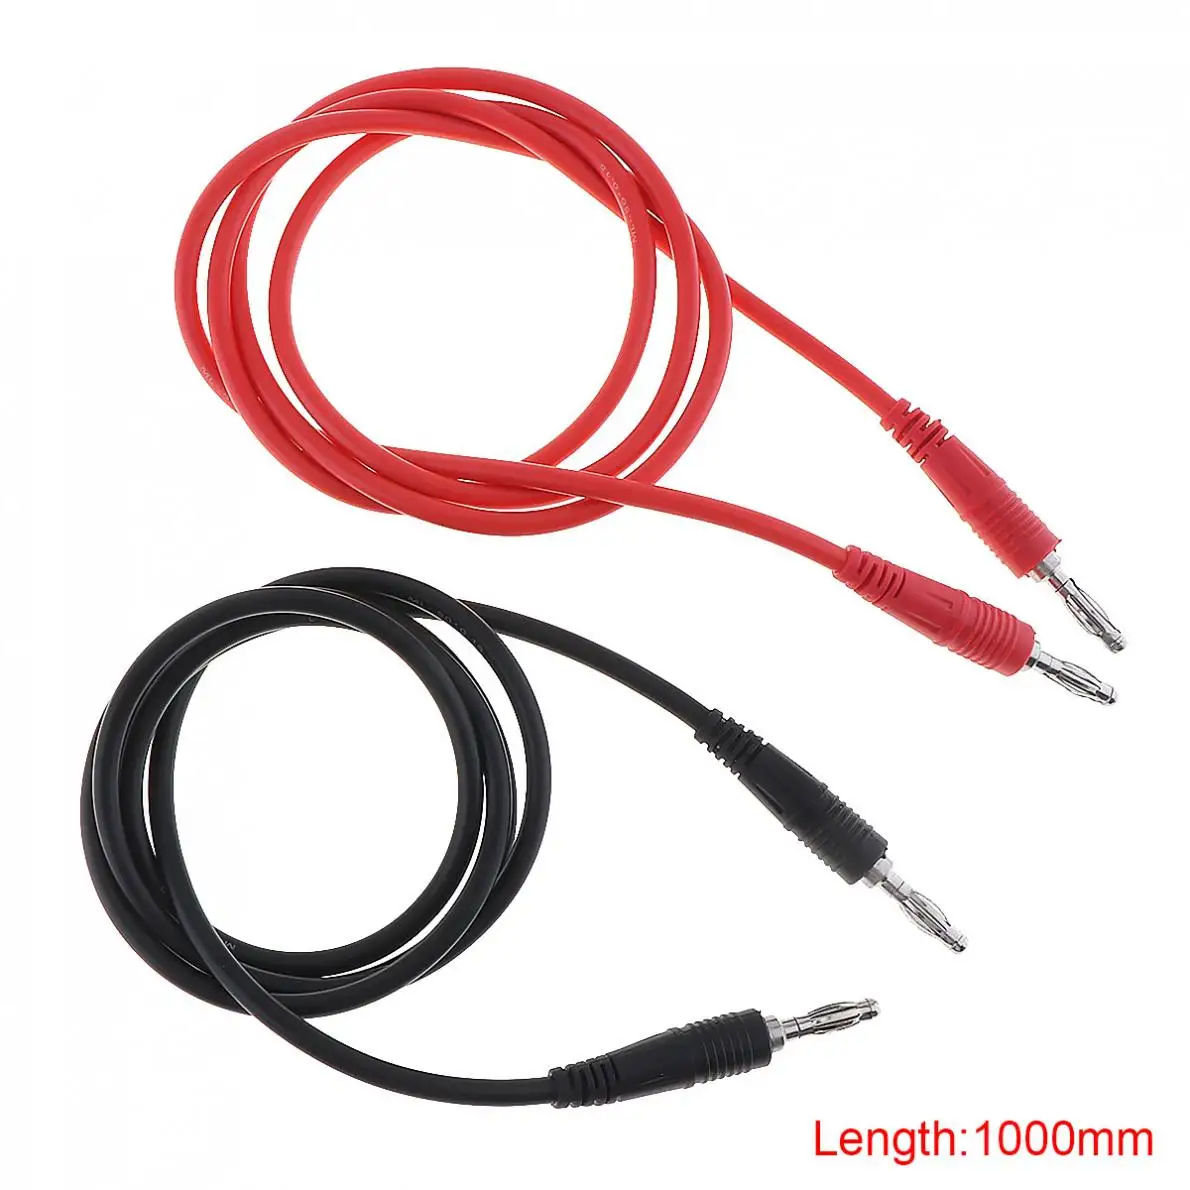 2pcs/lot 4mm Durable Banana Plug Cord to Test Hook Clip Probe Cable Lead Cable for Multimeter Test Equipment